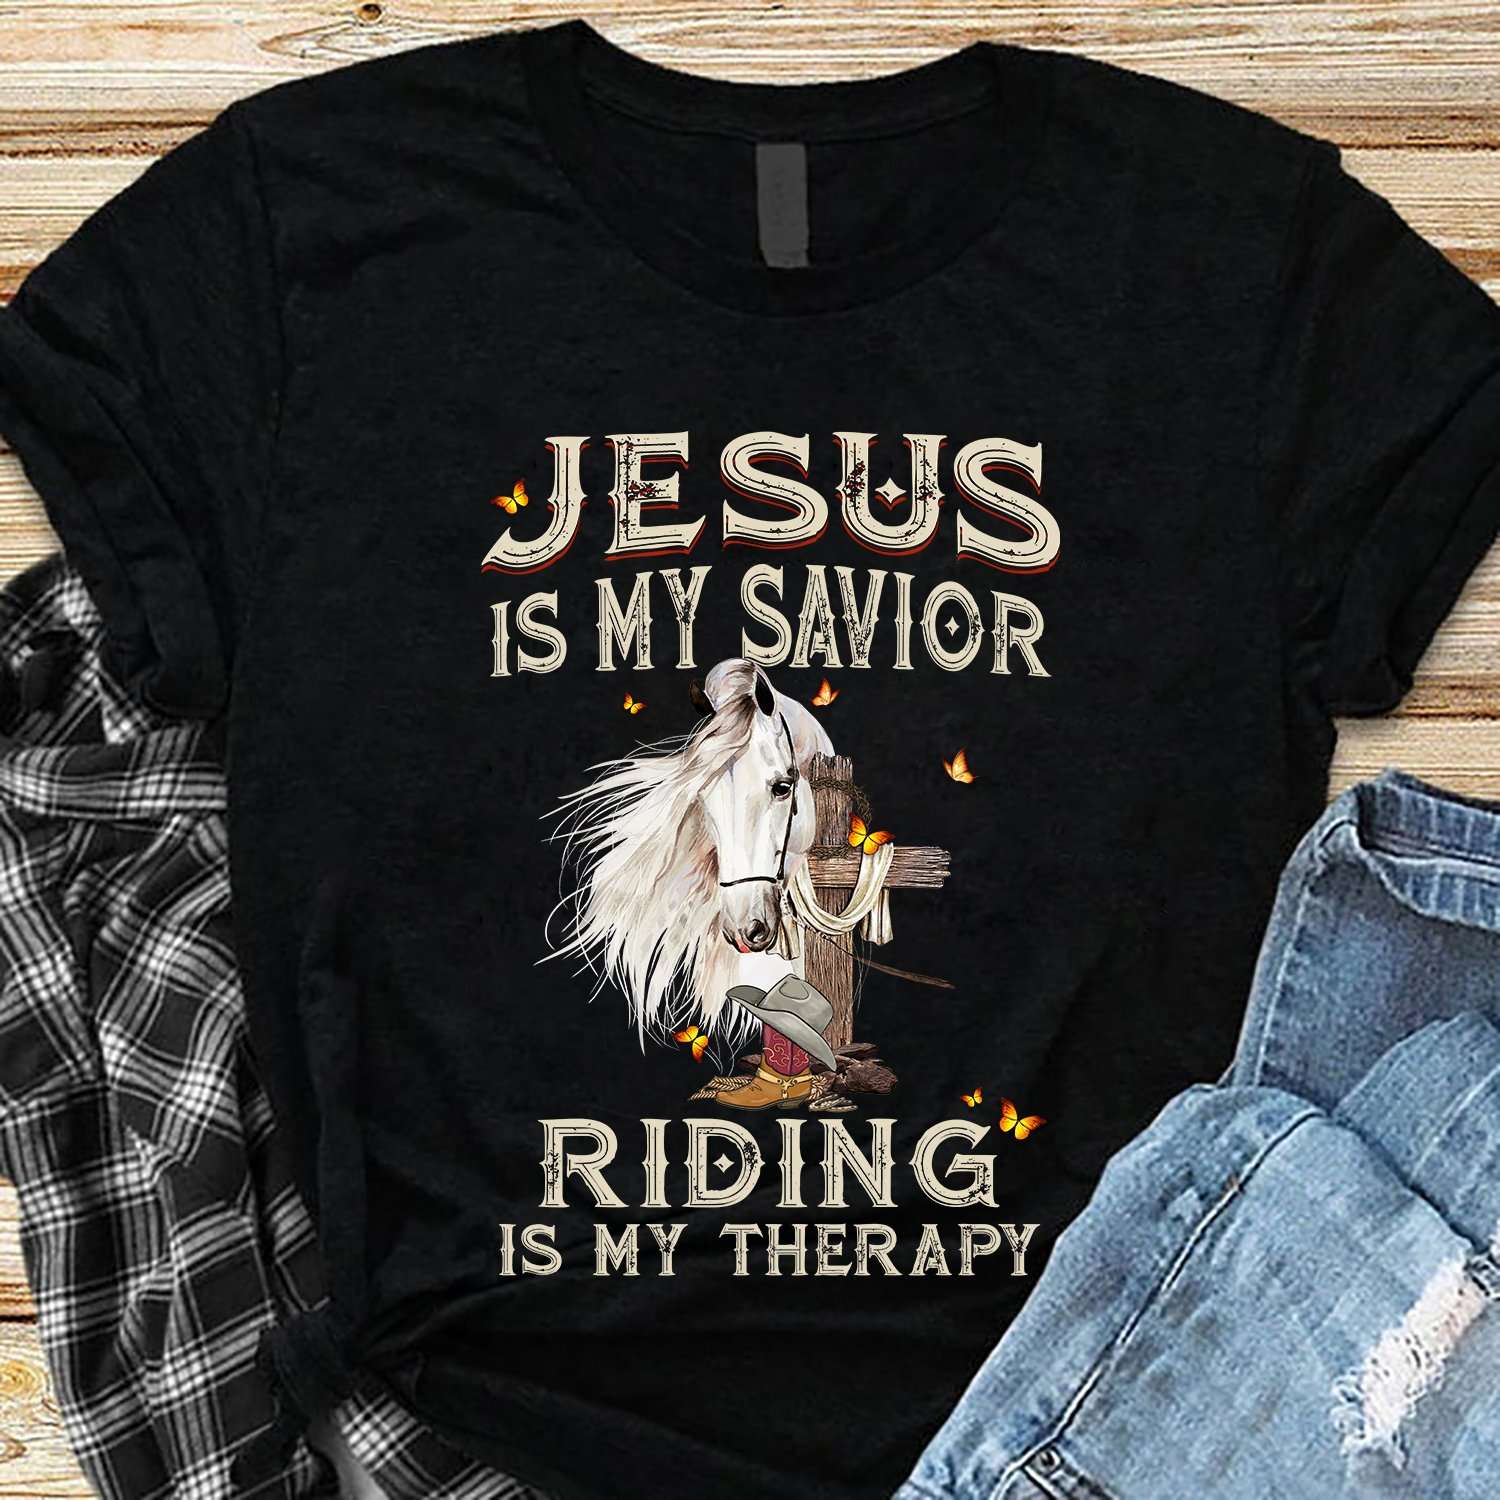 Jesus is my savior, riding is my therapy - Love riding and believe in Jesus